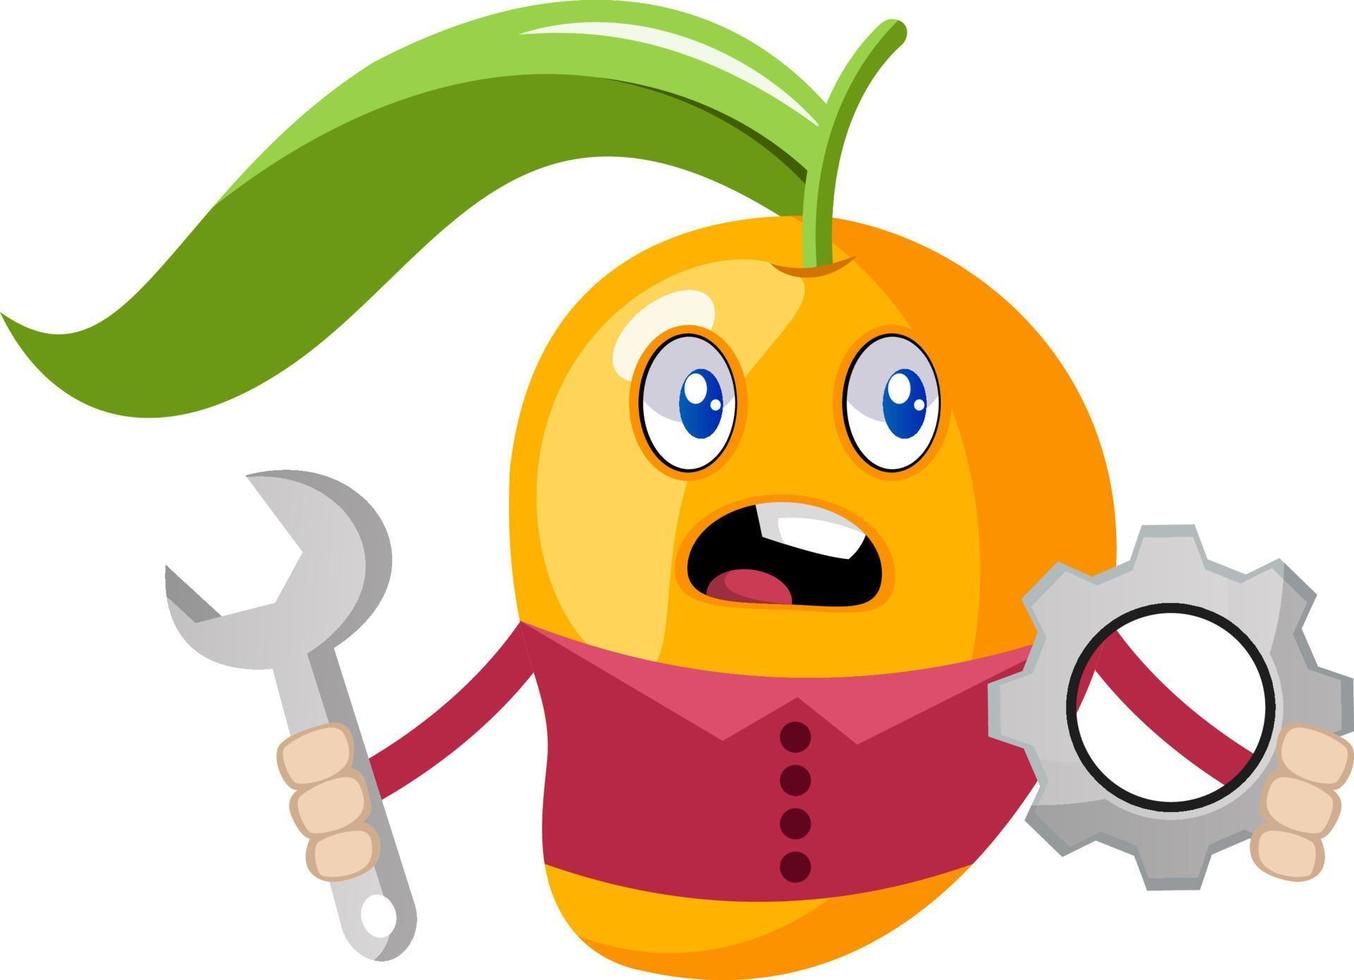 Mango with wrench, illustration, vector on white background.